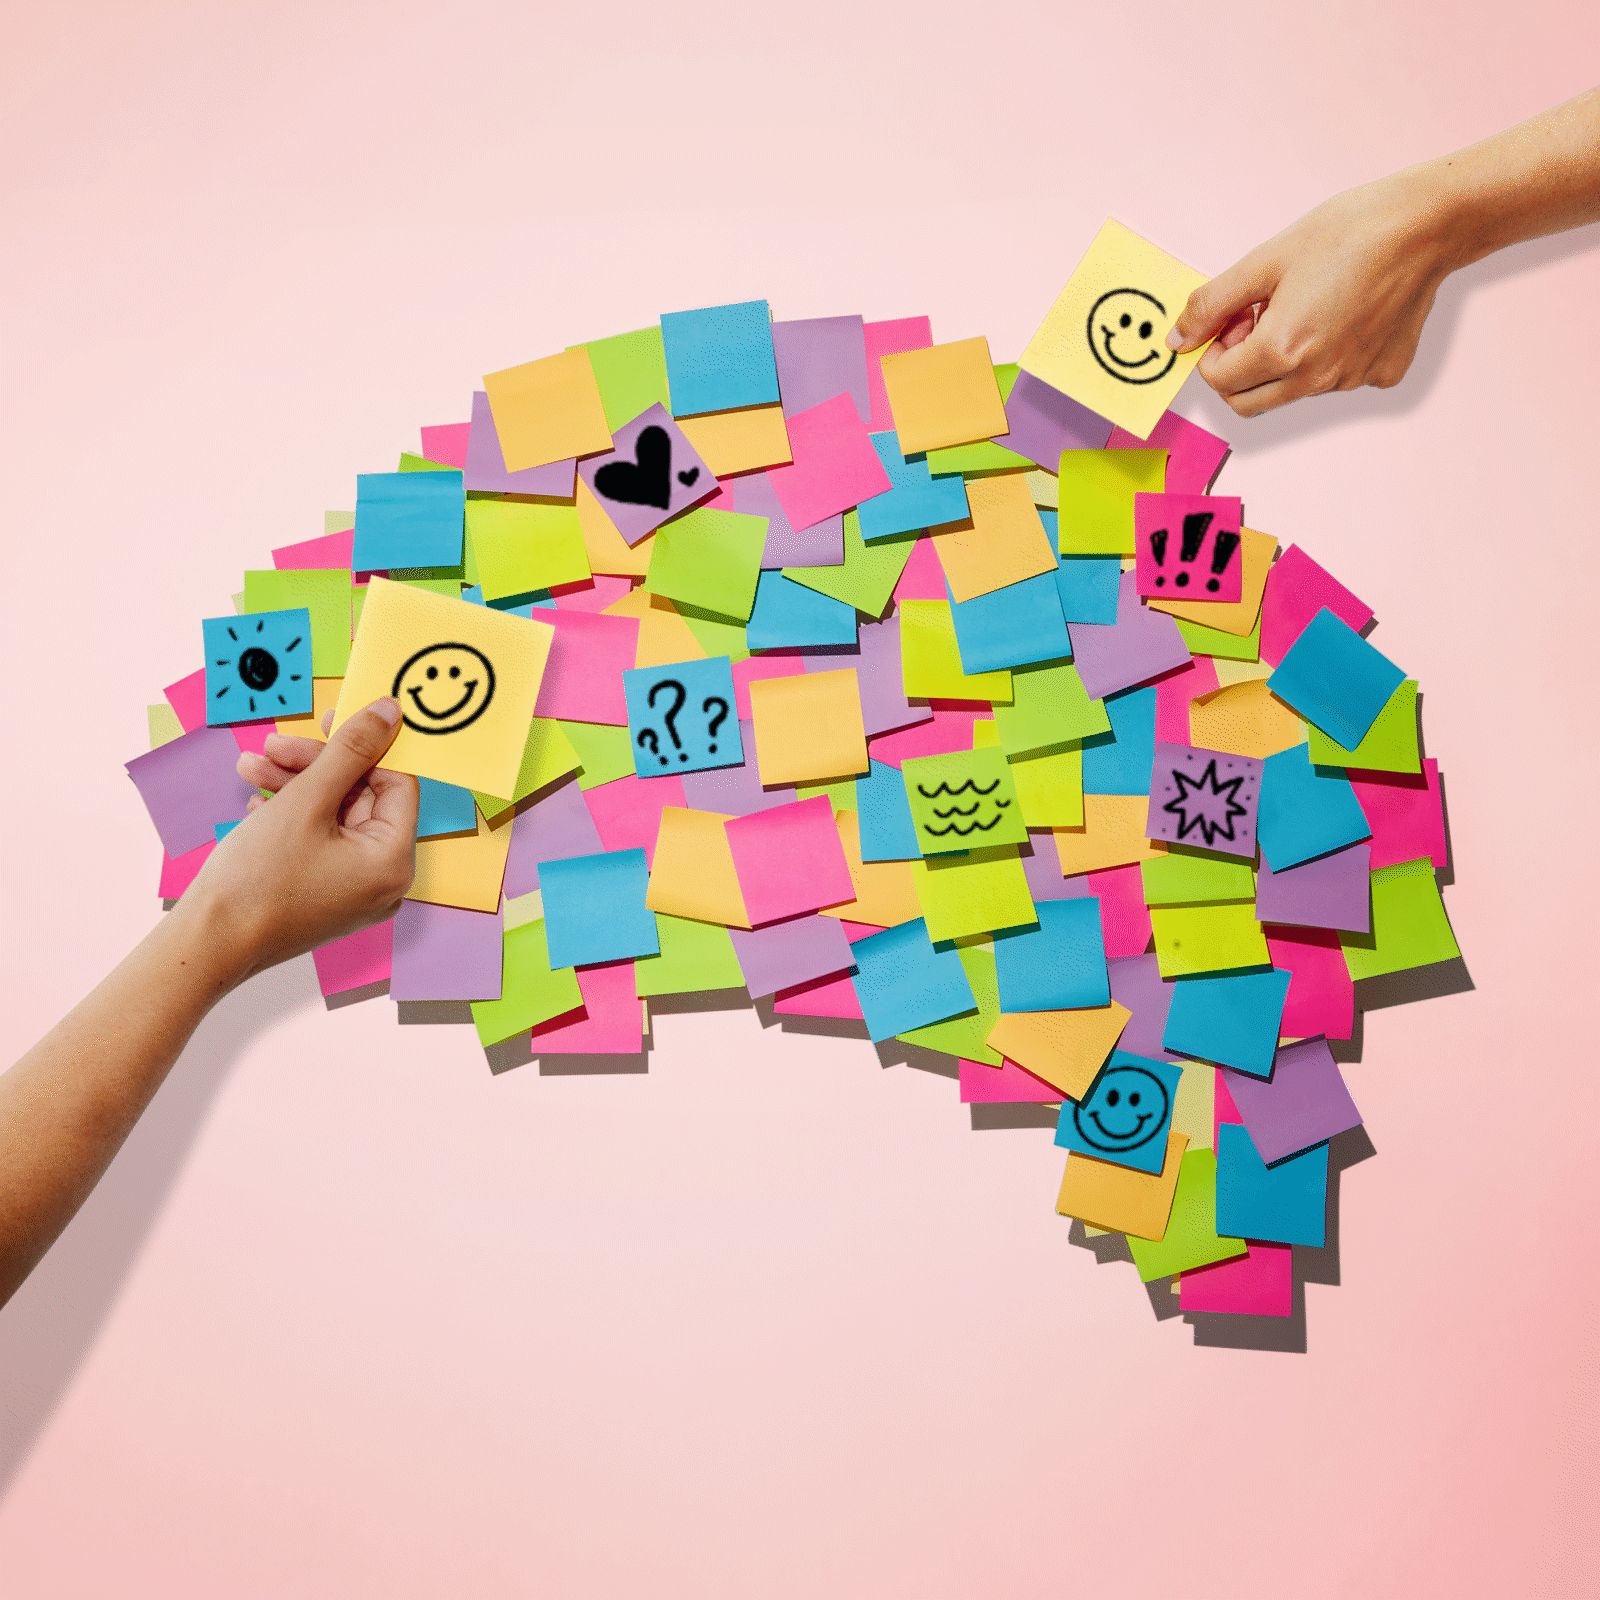 Post-it notes forming the shape of a brain with two hands animating in and out of screen, adding post-it notes to the collection.